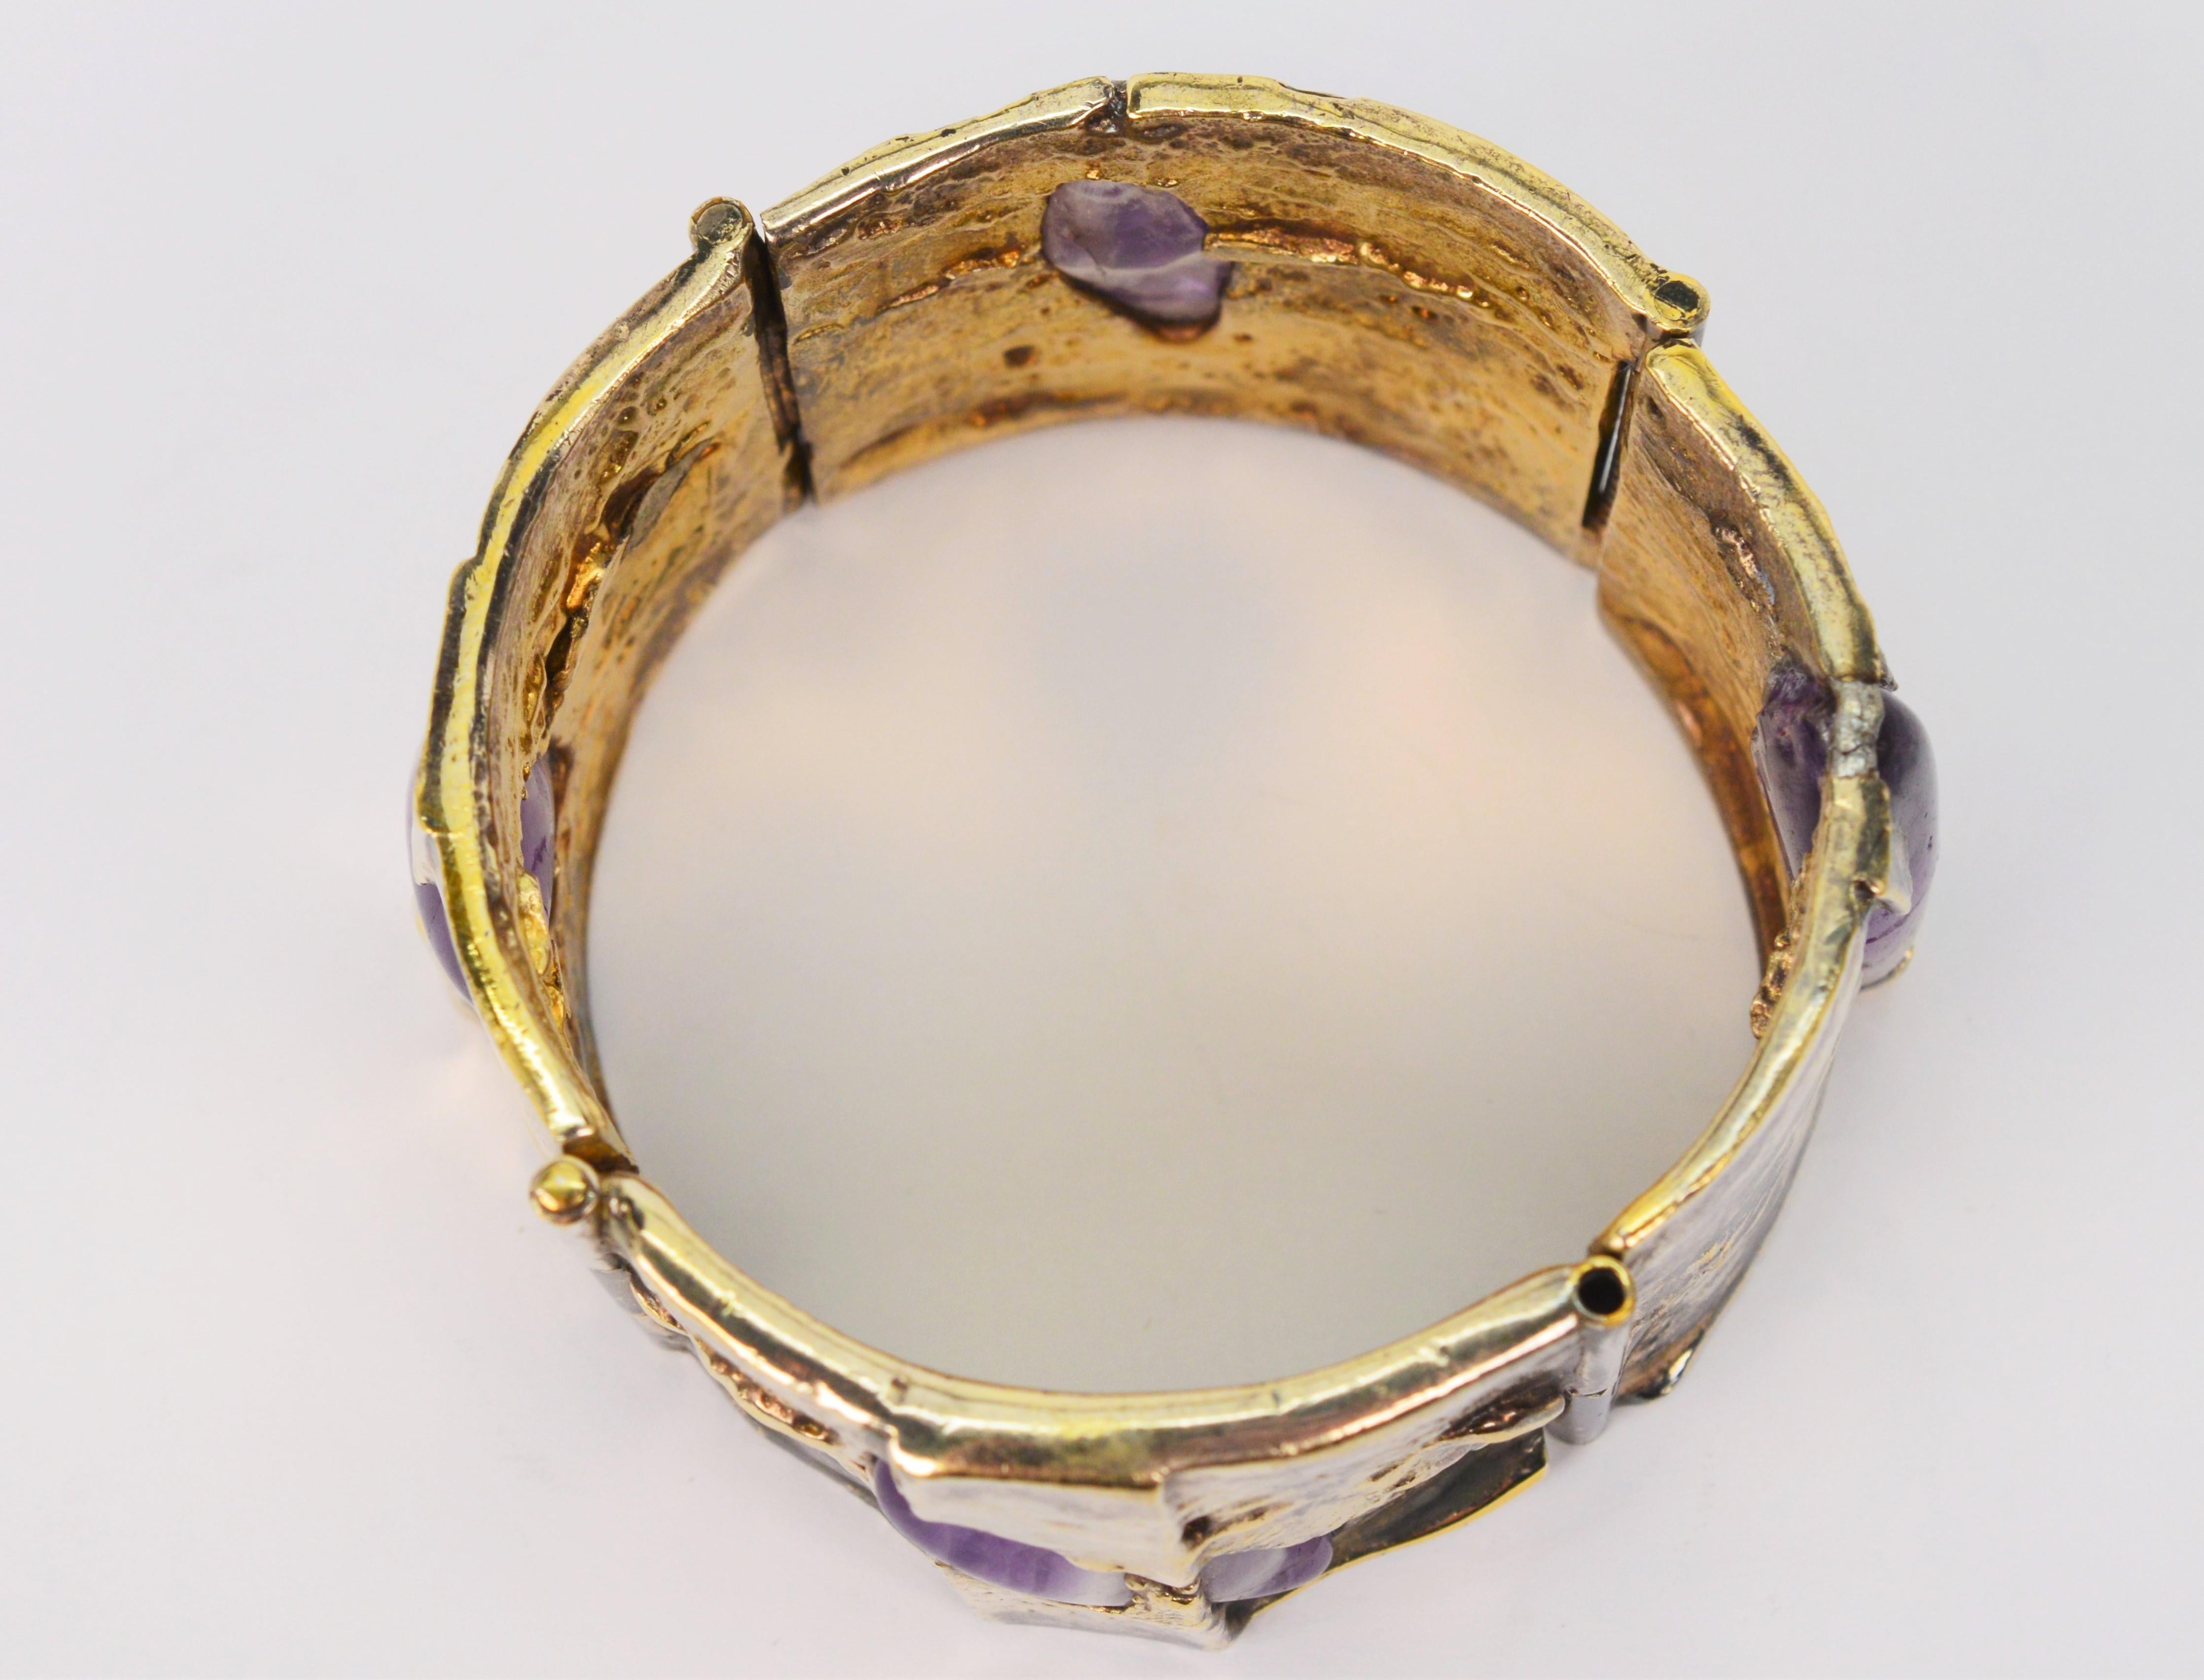 1950's Gilded Silver Amethyst Quartz Stone Panel Art Bracelet In Good Condition For Sale In Mount Kisco, NY